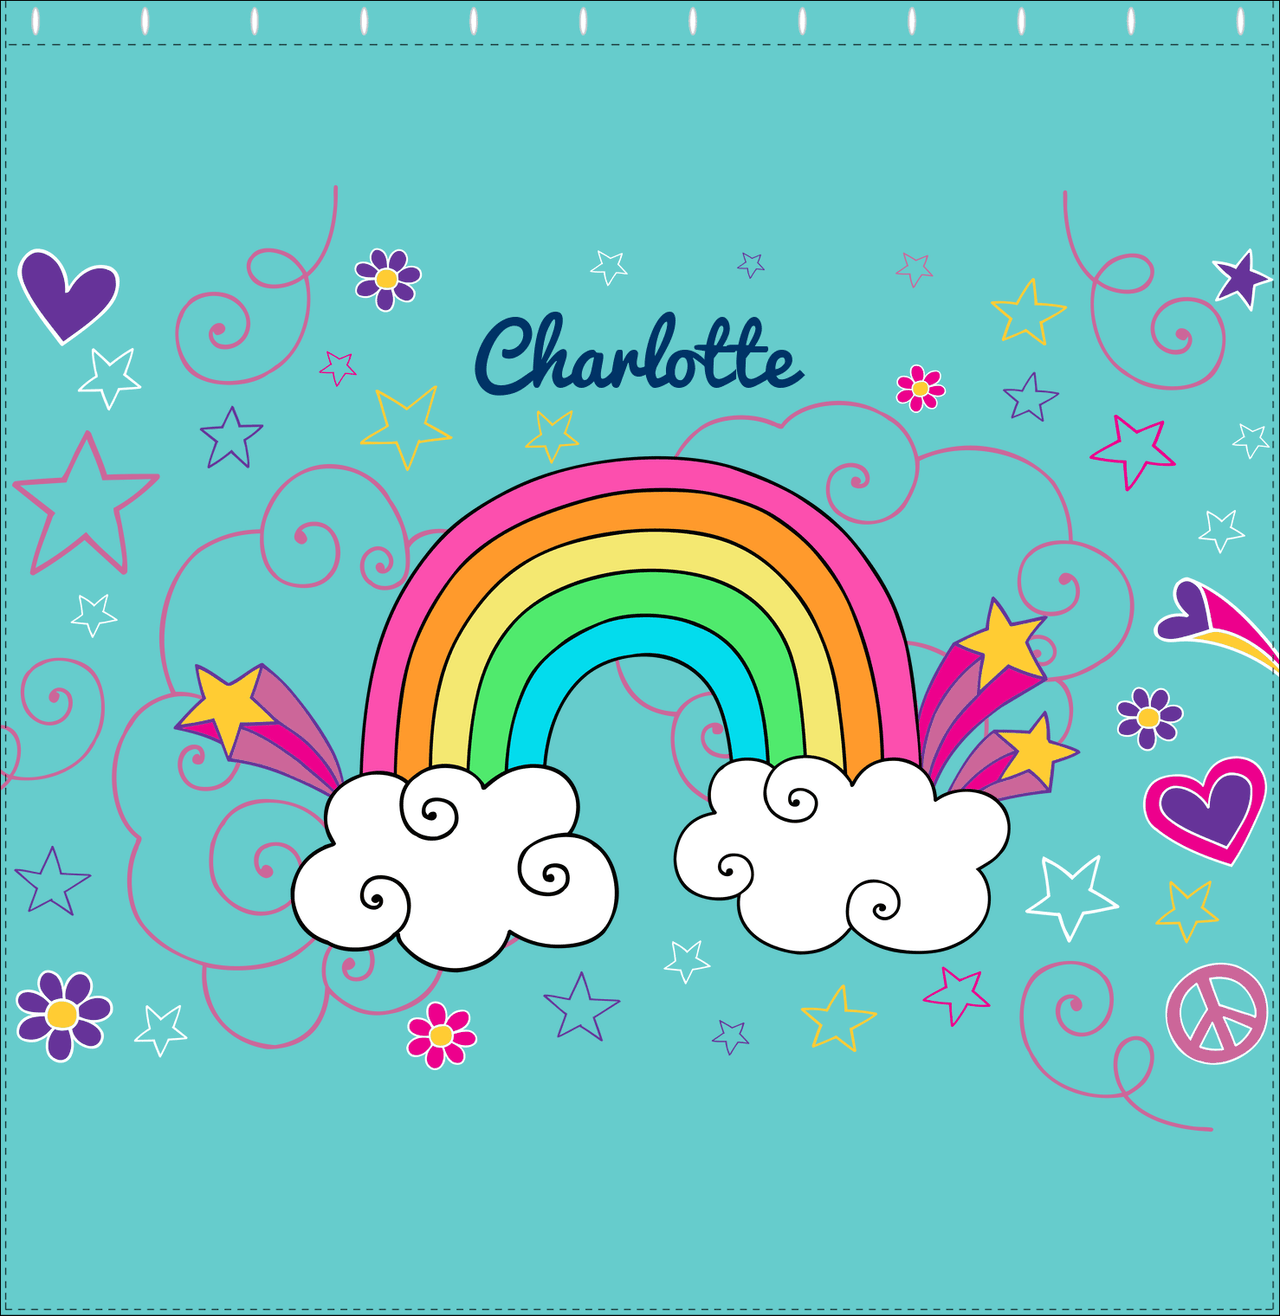 Personalized Rainbows Shower Curtain VI - Rainbow Doodle - Teal Background - Decorate View